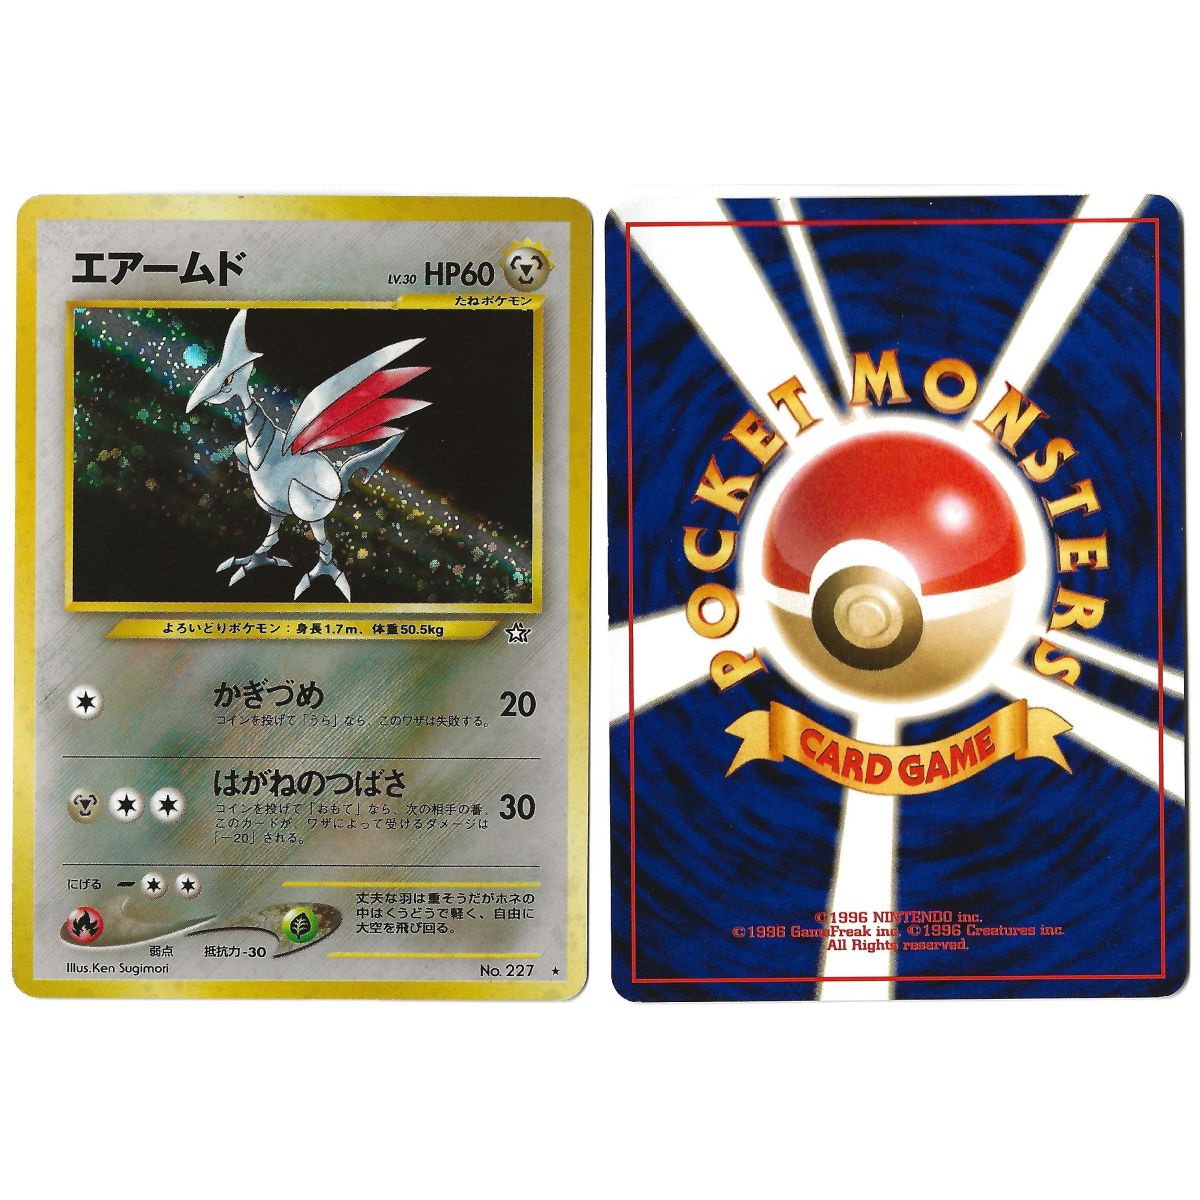 Skarmory (1) No.227 Gold, Silver, to a New World... N1 Holo Unlimited Japonais Voir Scan